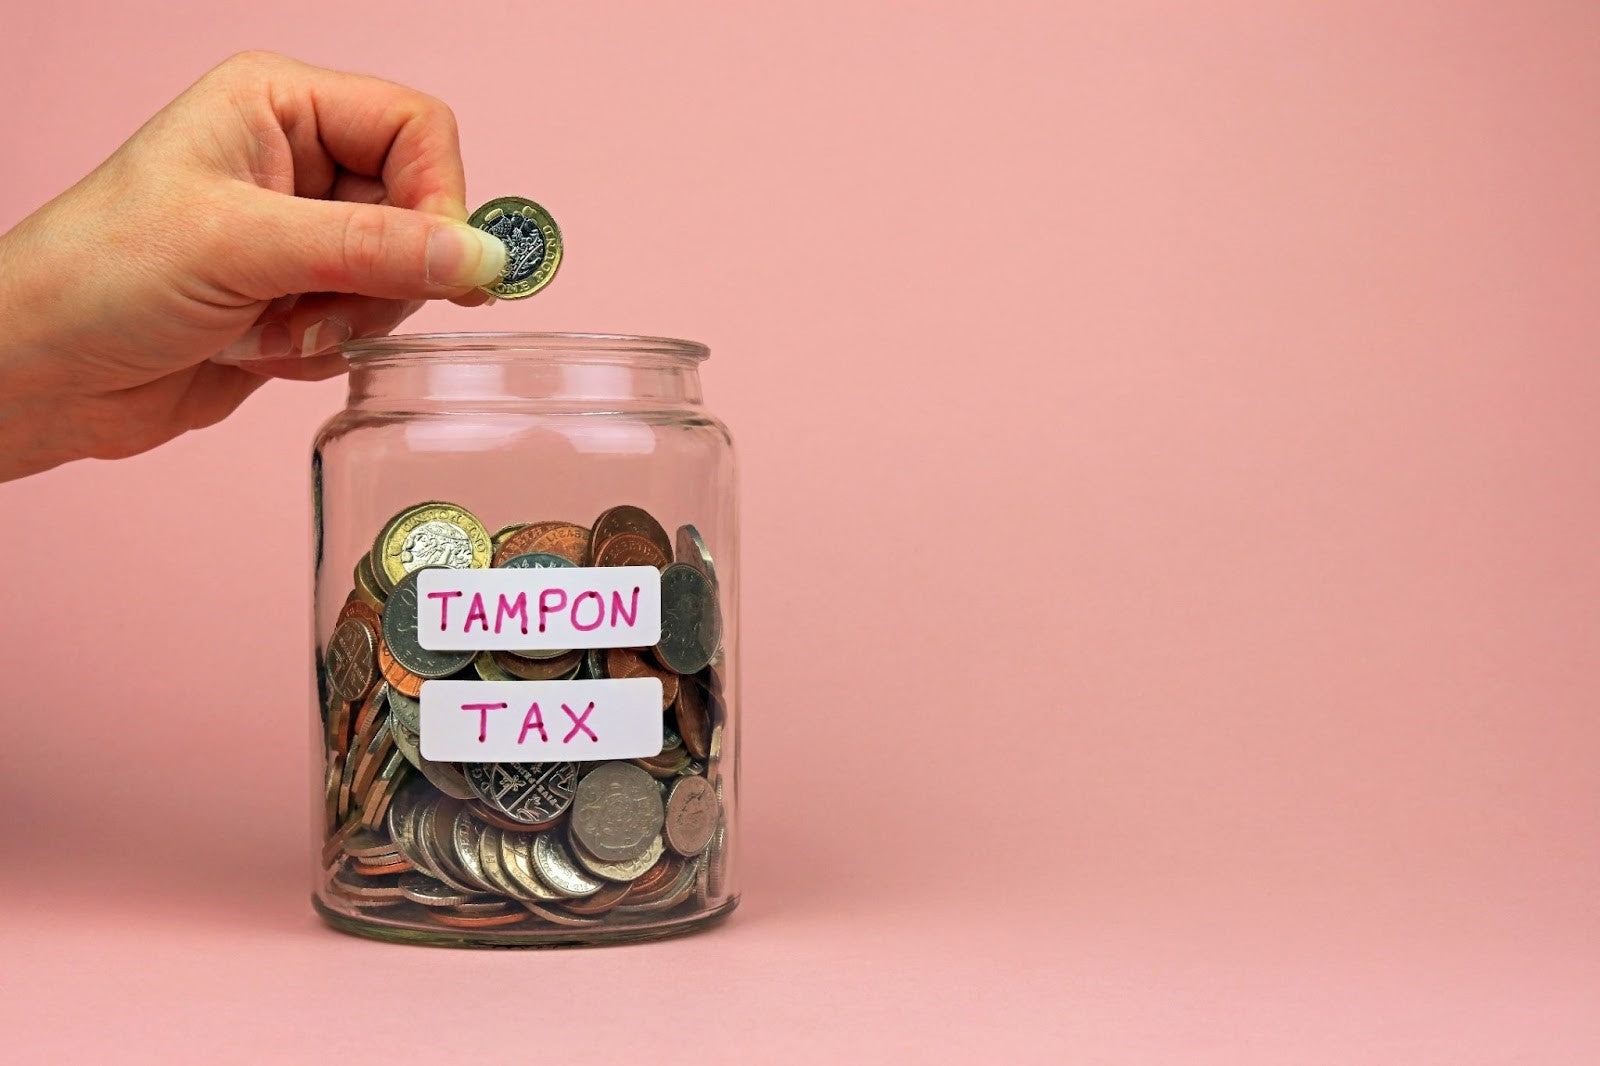 A jar of coins with a label on it that says “tampon tax”